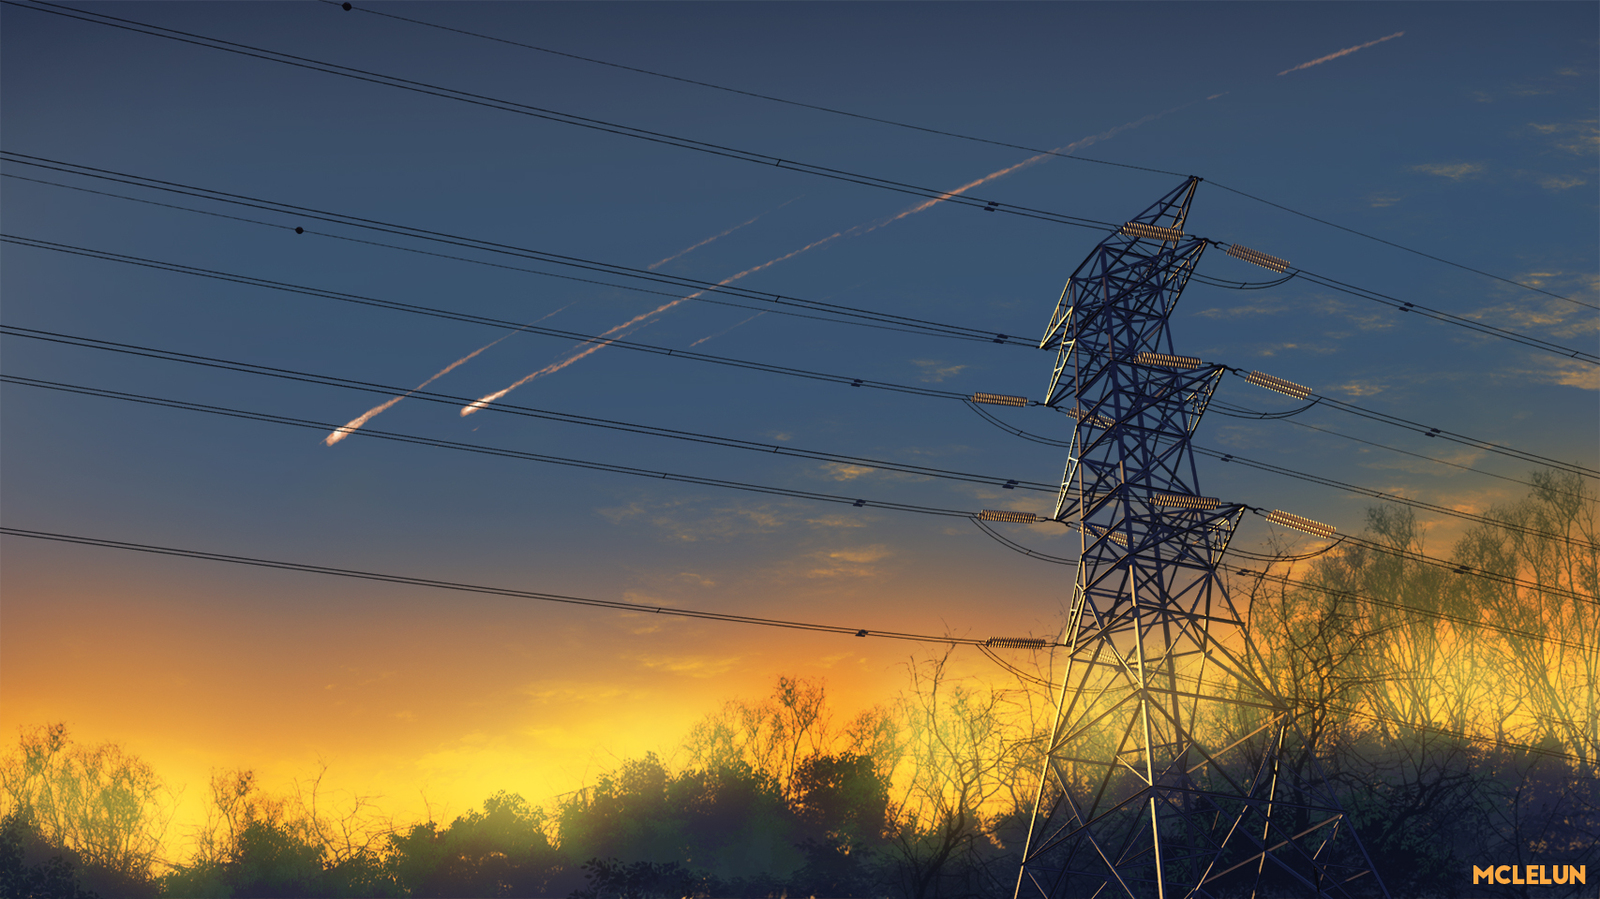 Meteor Pylon - Mclelun, The wire, Power lines, Drawing, Art